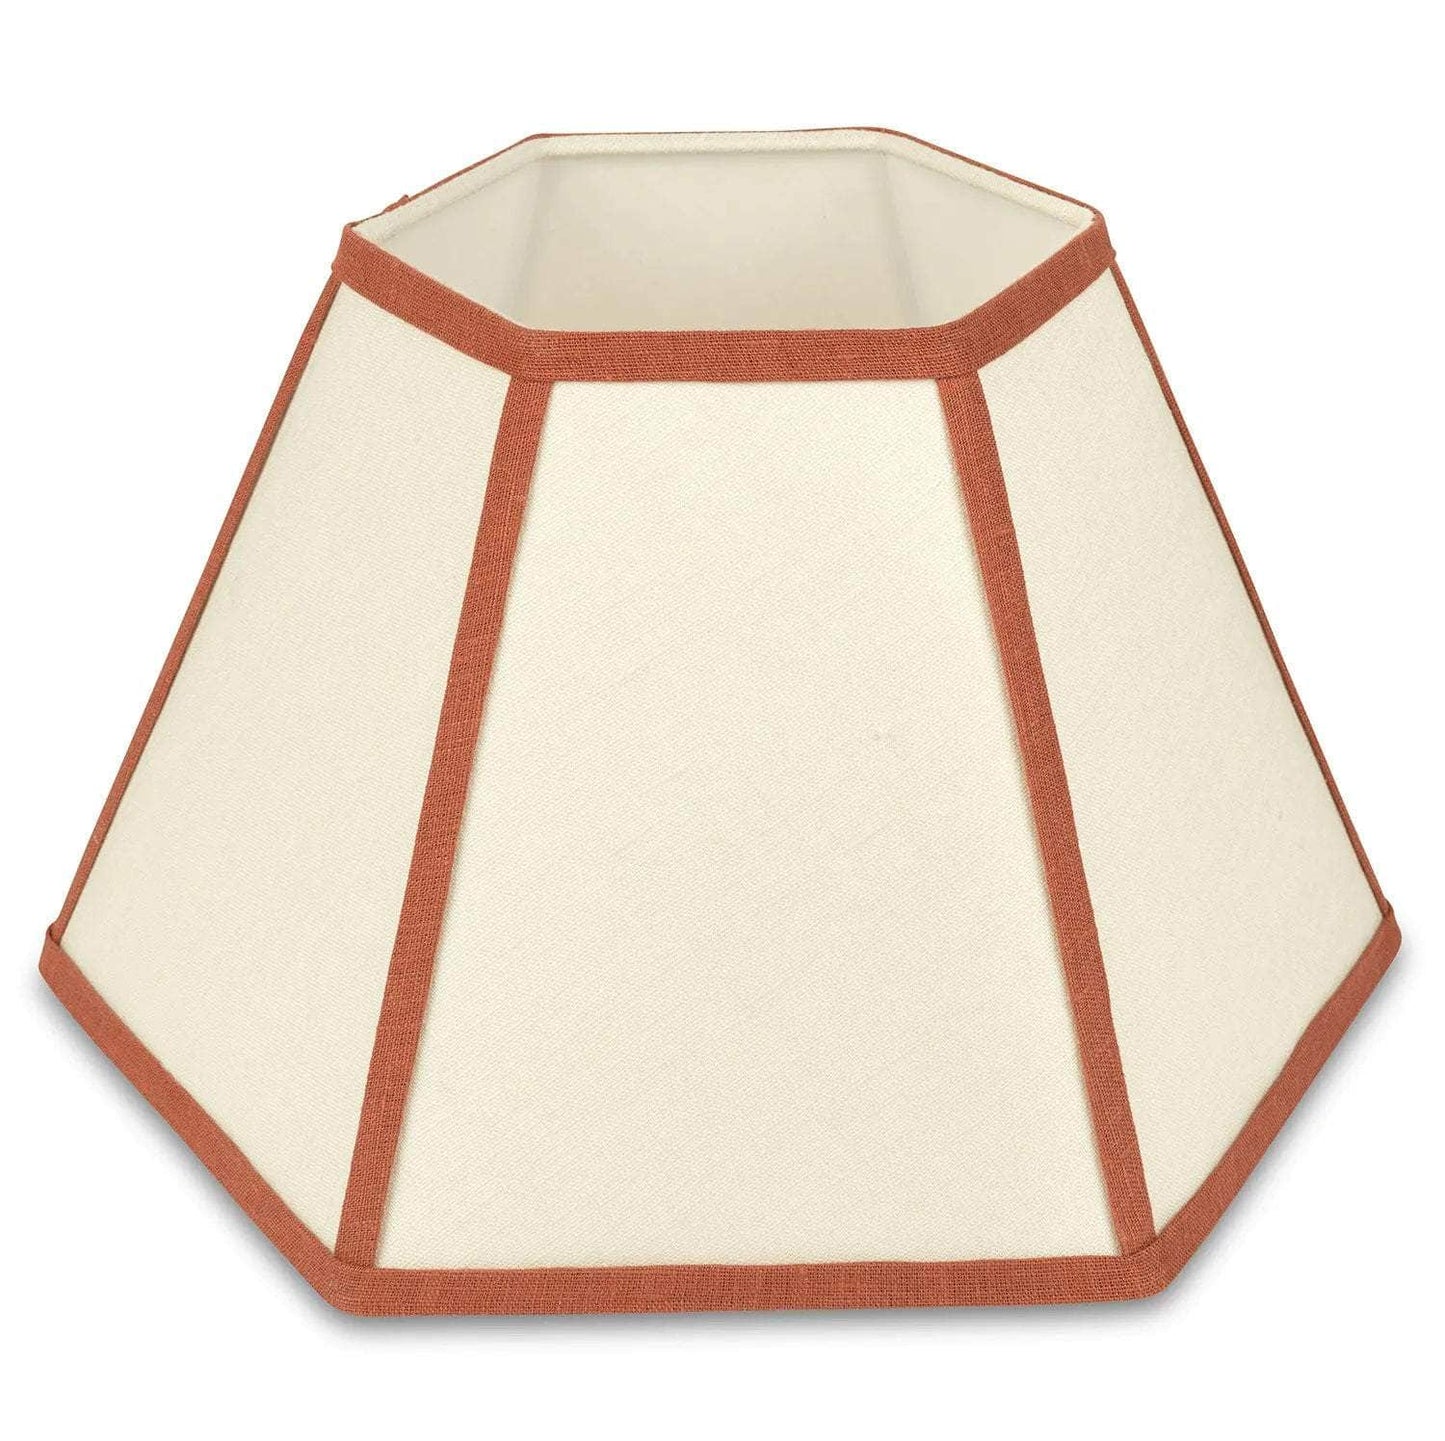 Hexagonal Lampshade in Oatmeal with Contrast Trim